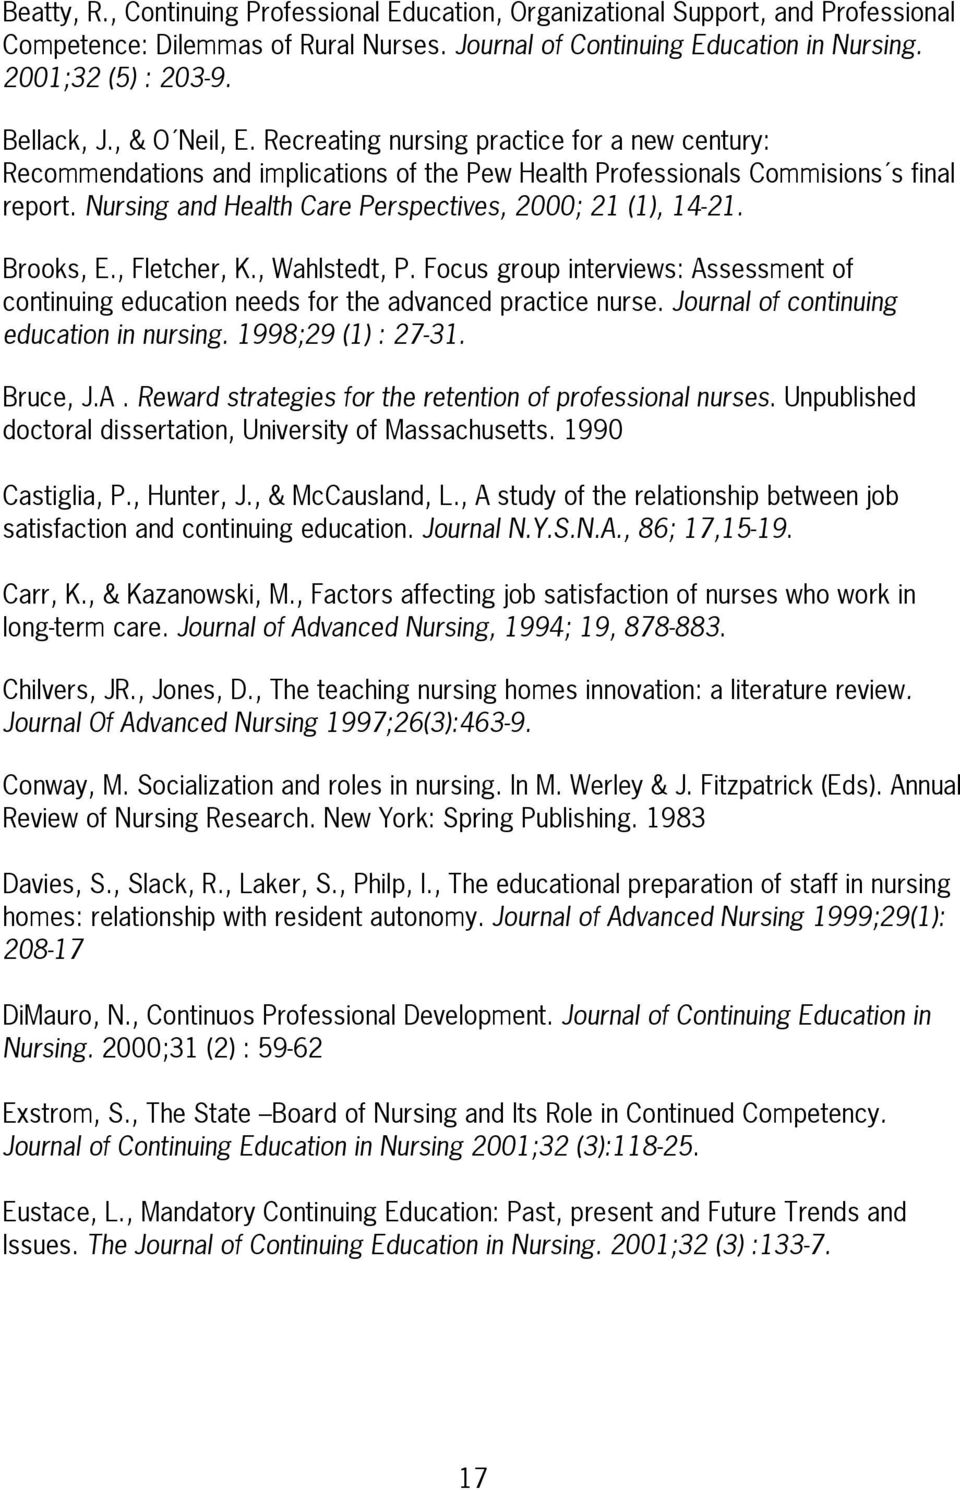 Nursing and Health Care Perspectives, 2000; 21 (1), 14-21. Brooks, E., Fletcher, K., Wahlstedt, P. Focus group interviews: Assessment of continuing education needs for the advanced practice nurse.